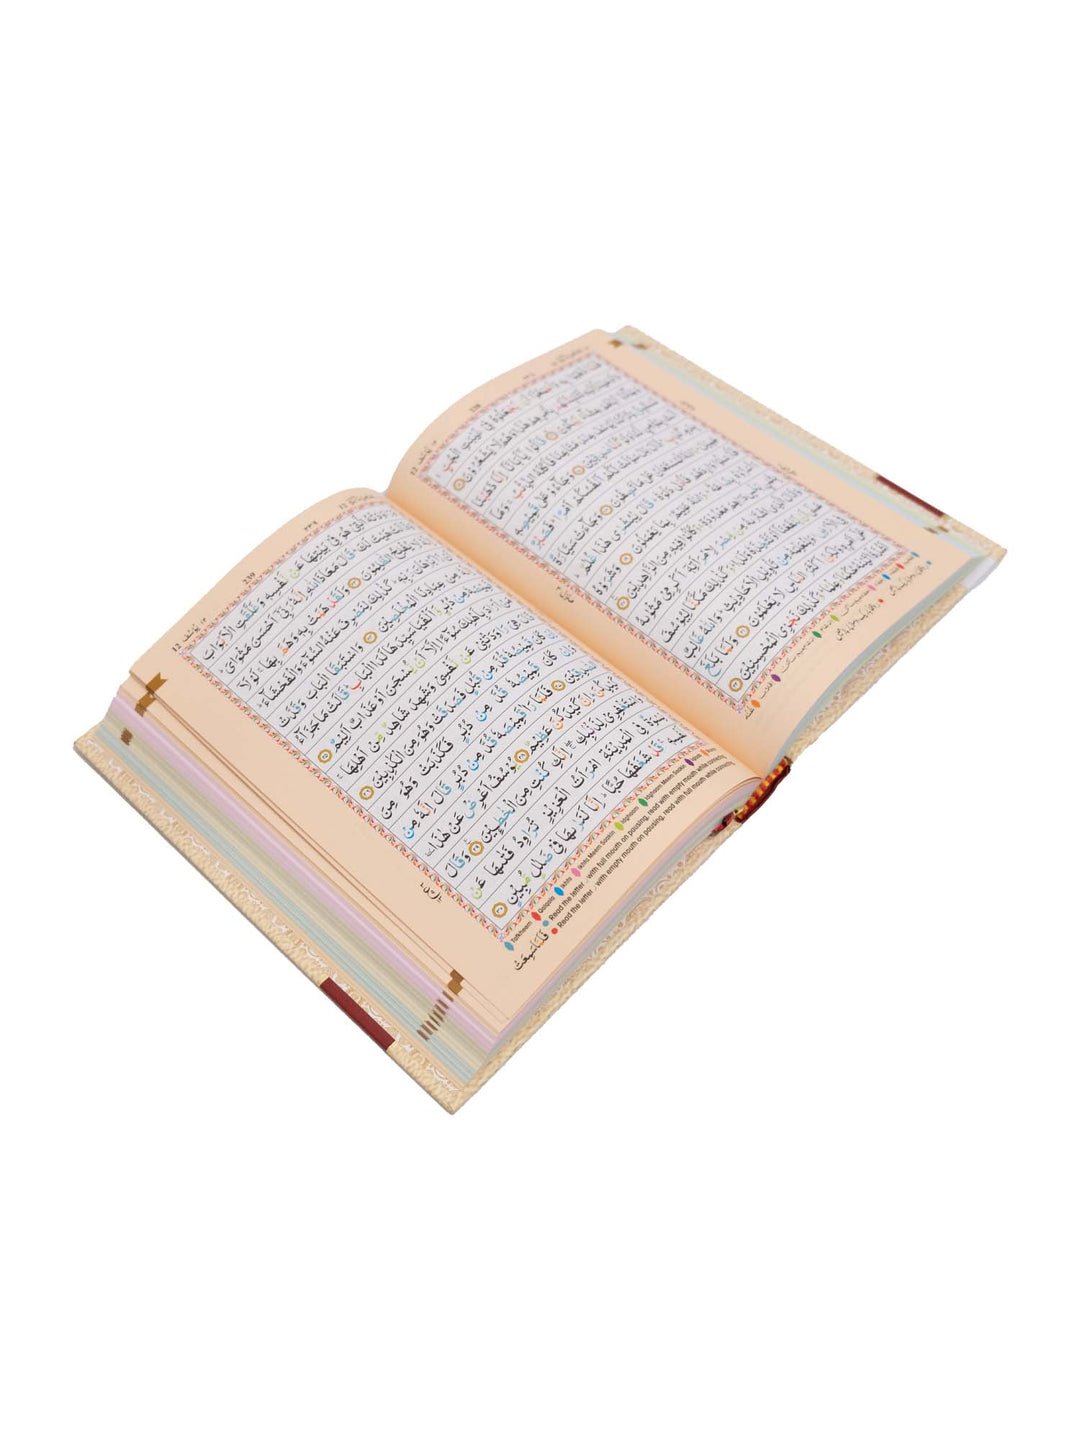 The Holy Quran - 15 Lines Colour Coded Tajweed Rules/Manzils (Indo Pak Script) 123 - A5 Size